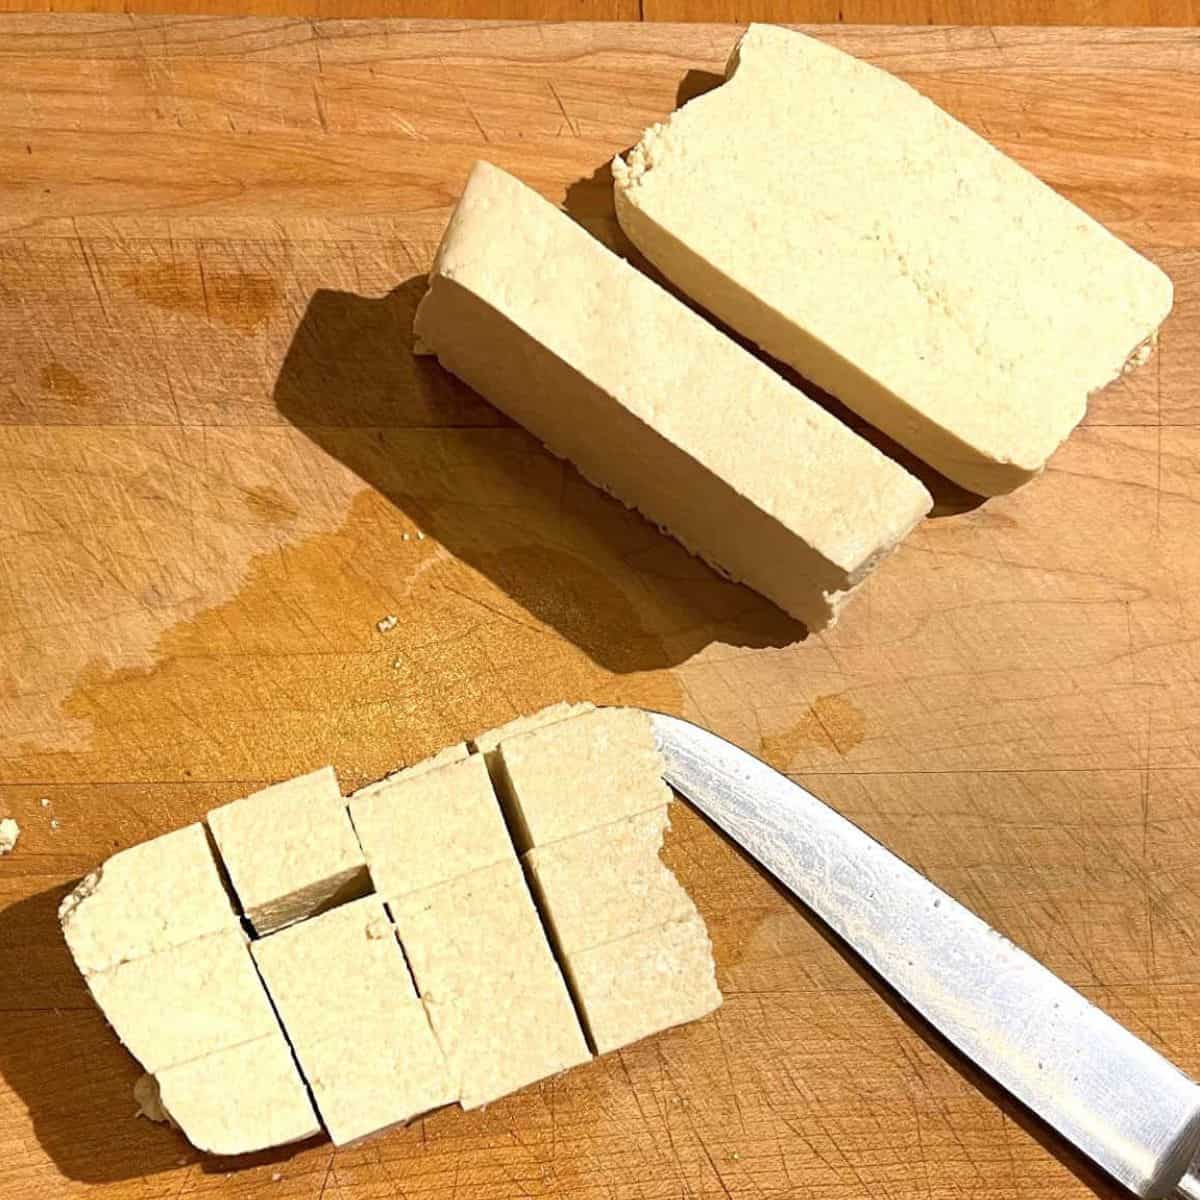 Tofu slices on wooden chopping board with knife.